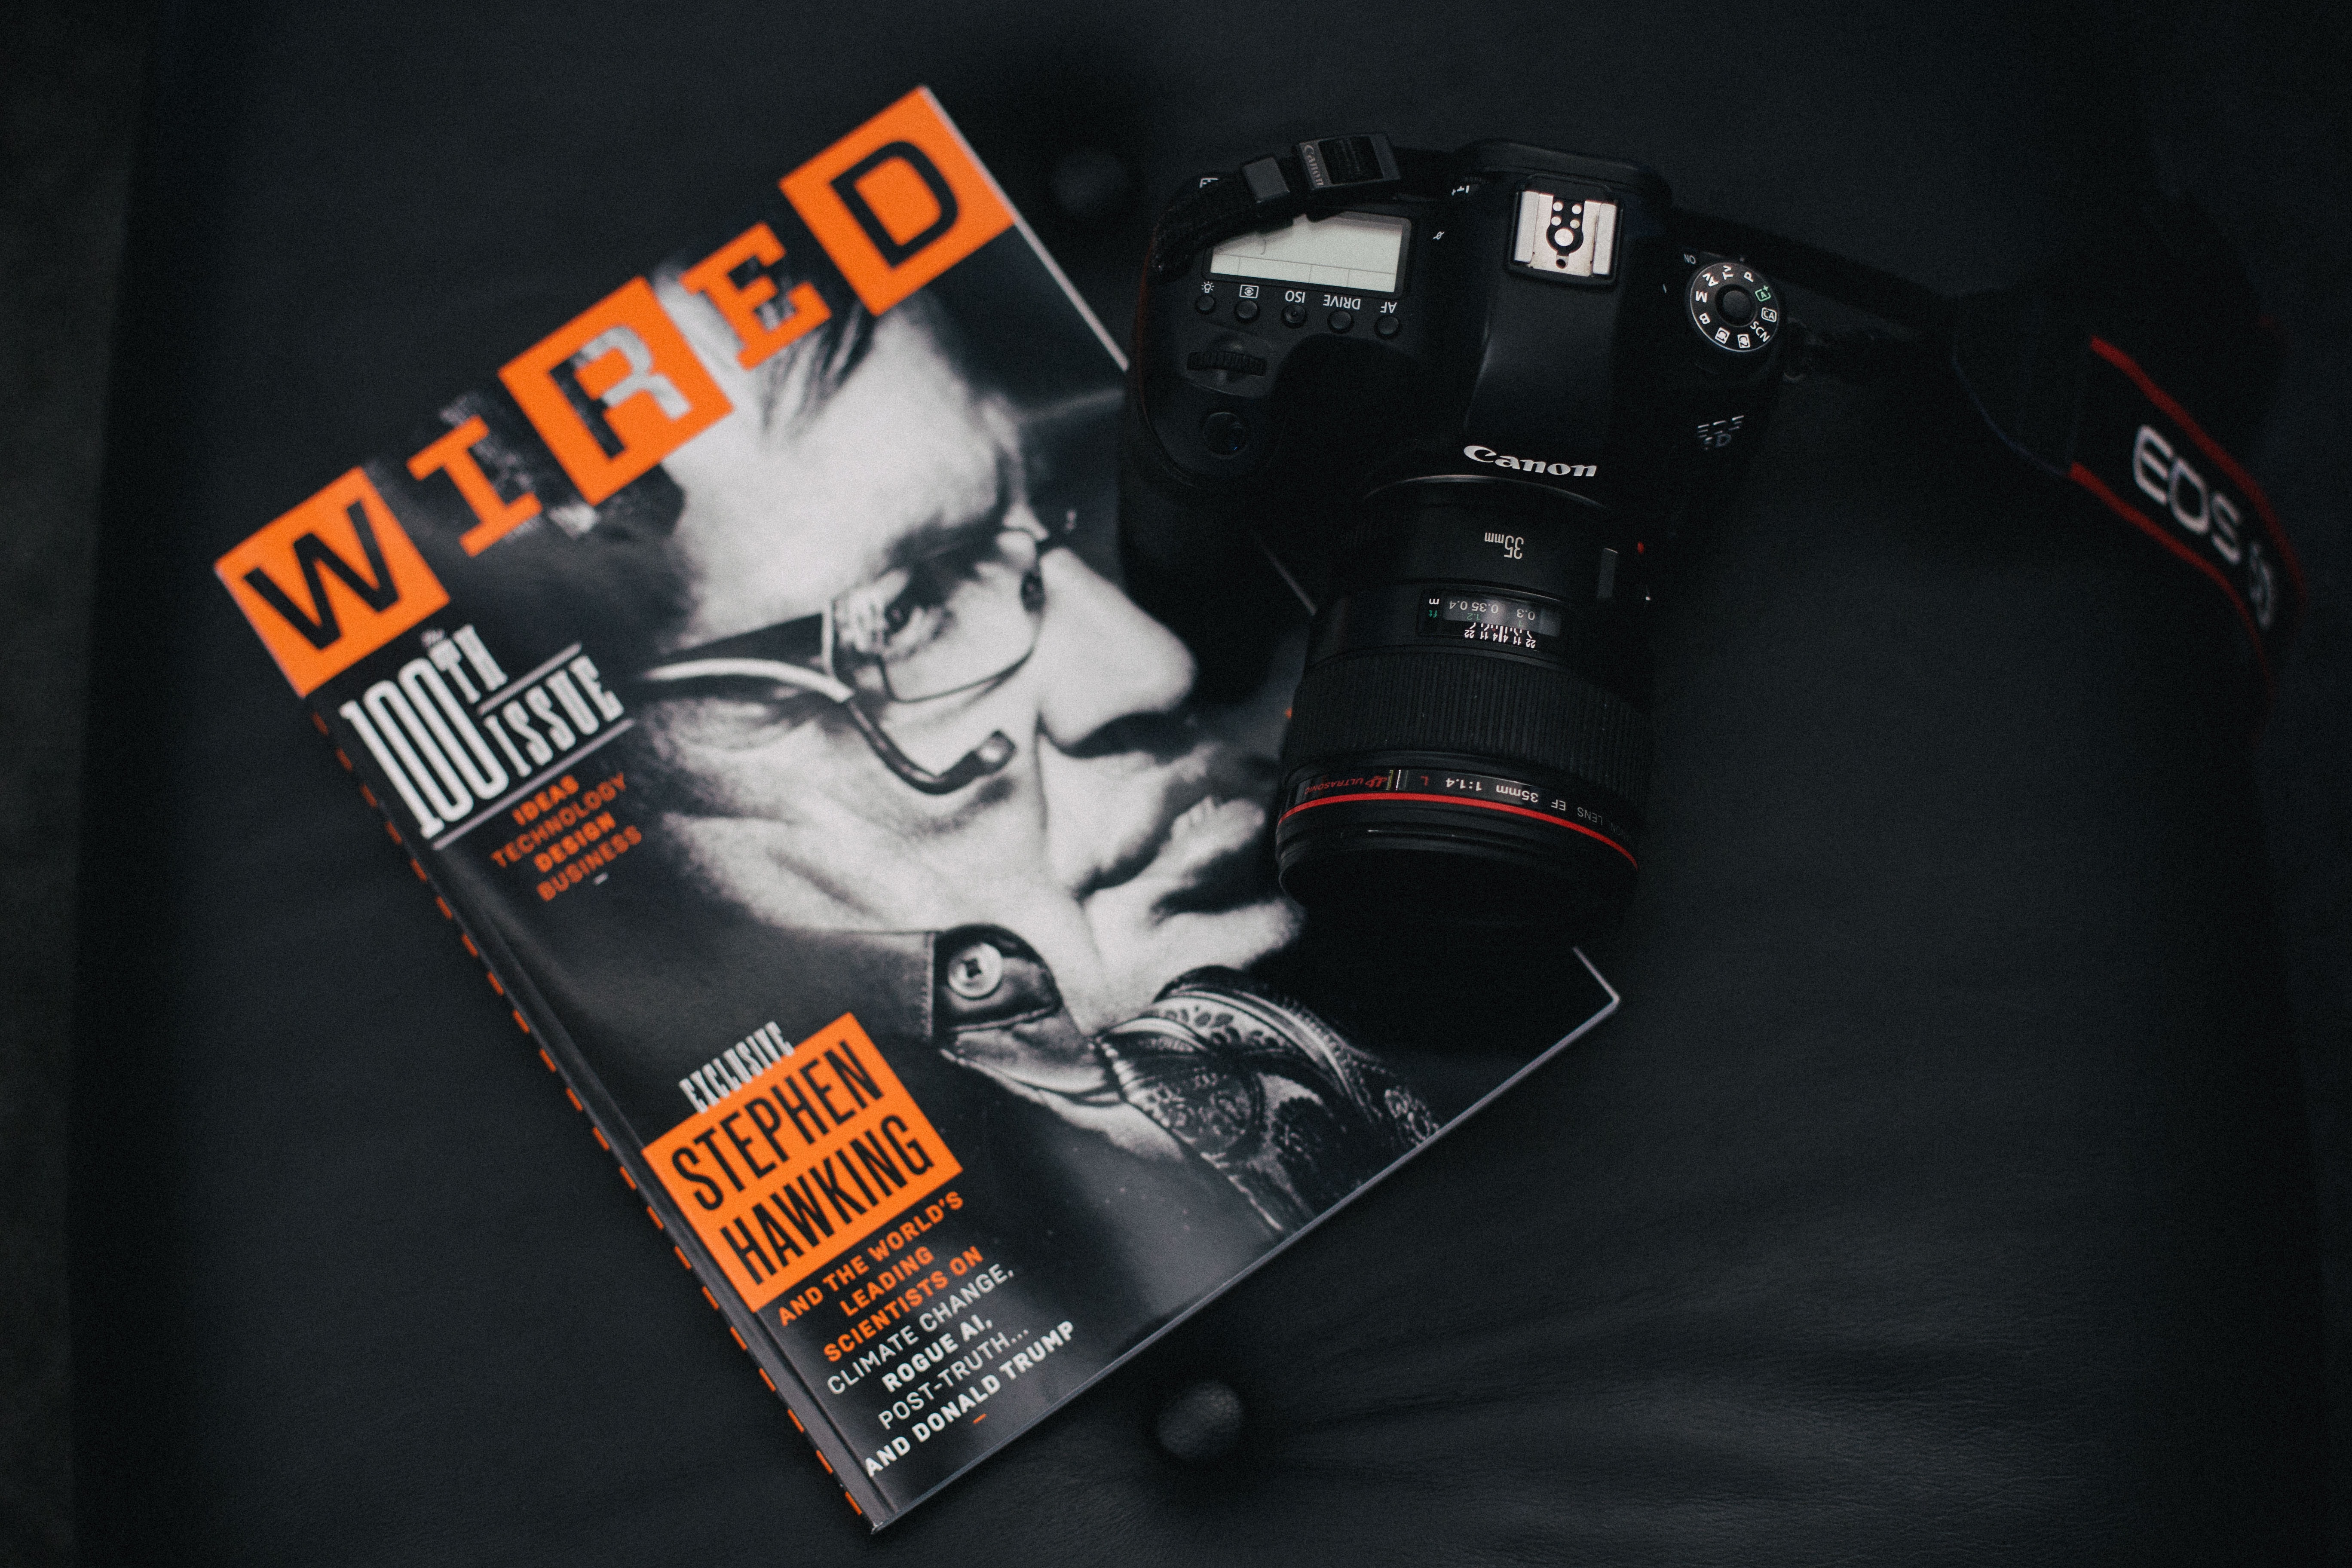 Wired magazine cover next to a camera